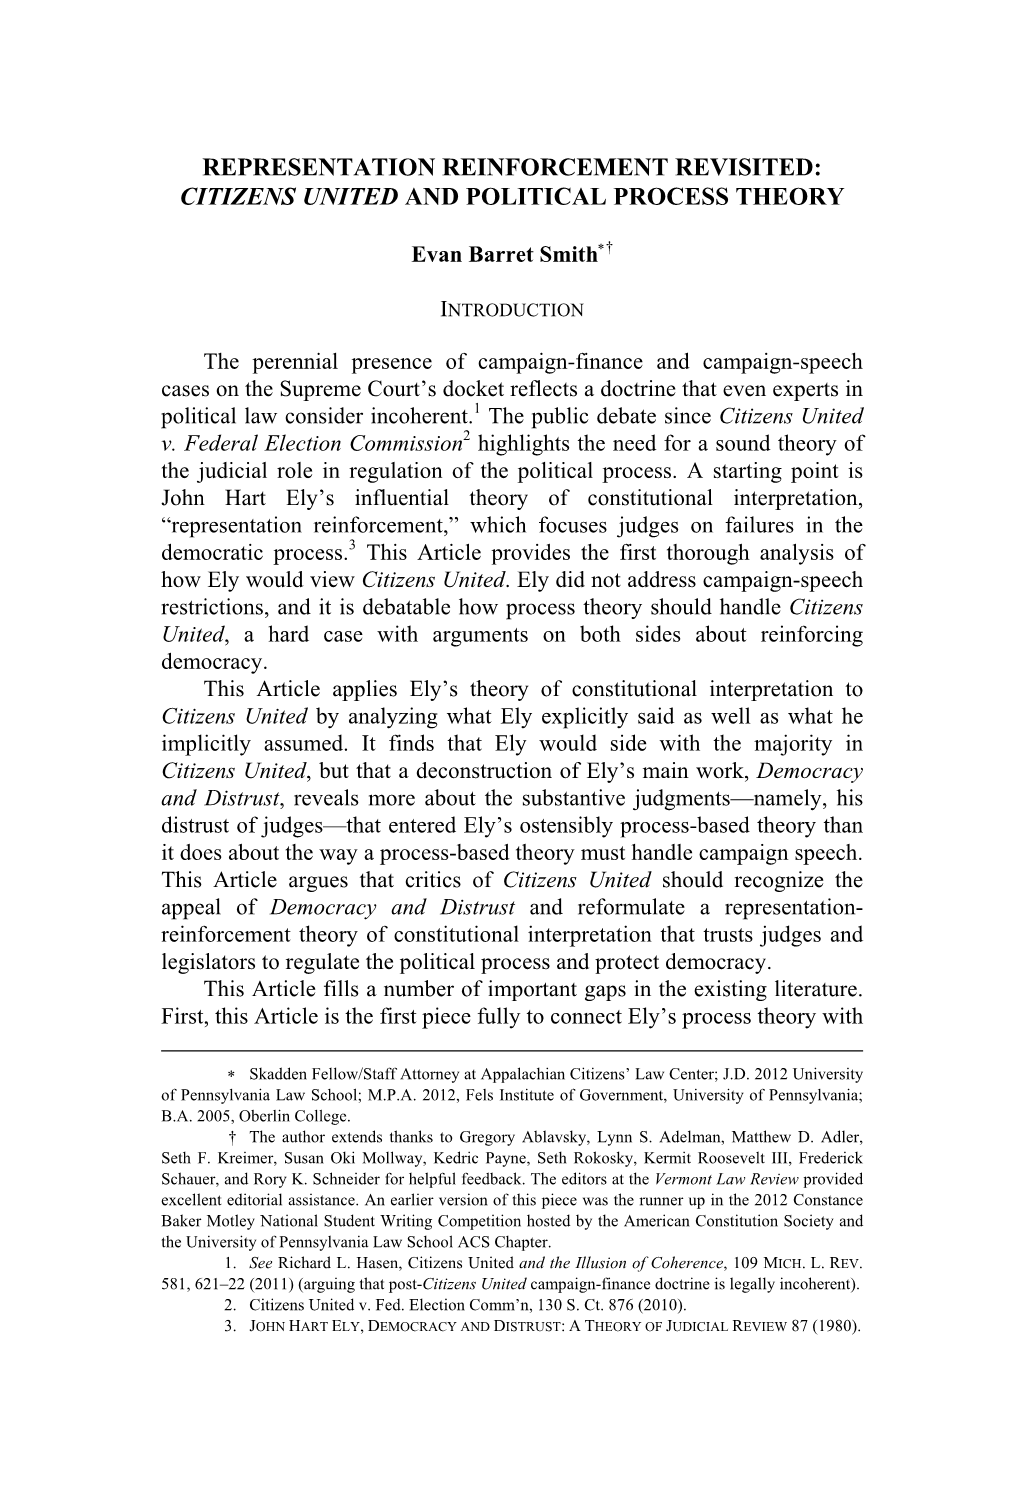 Representation Reinforcement Revisited: Citizens United and Political Process Theory